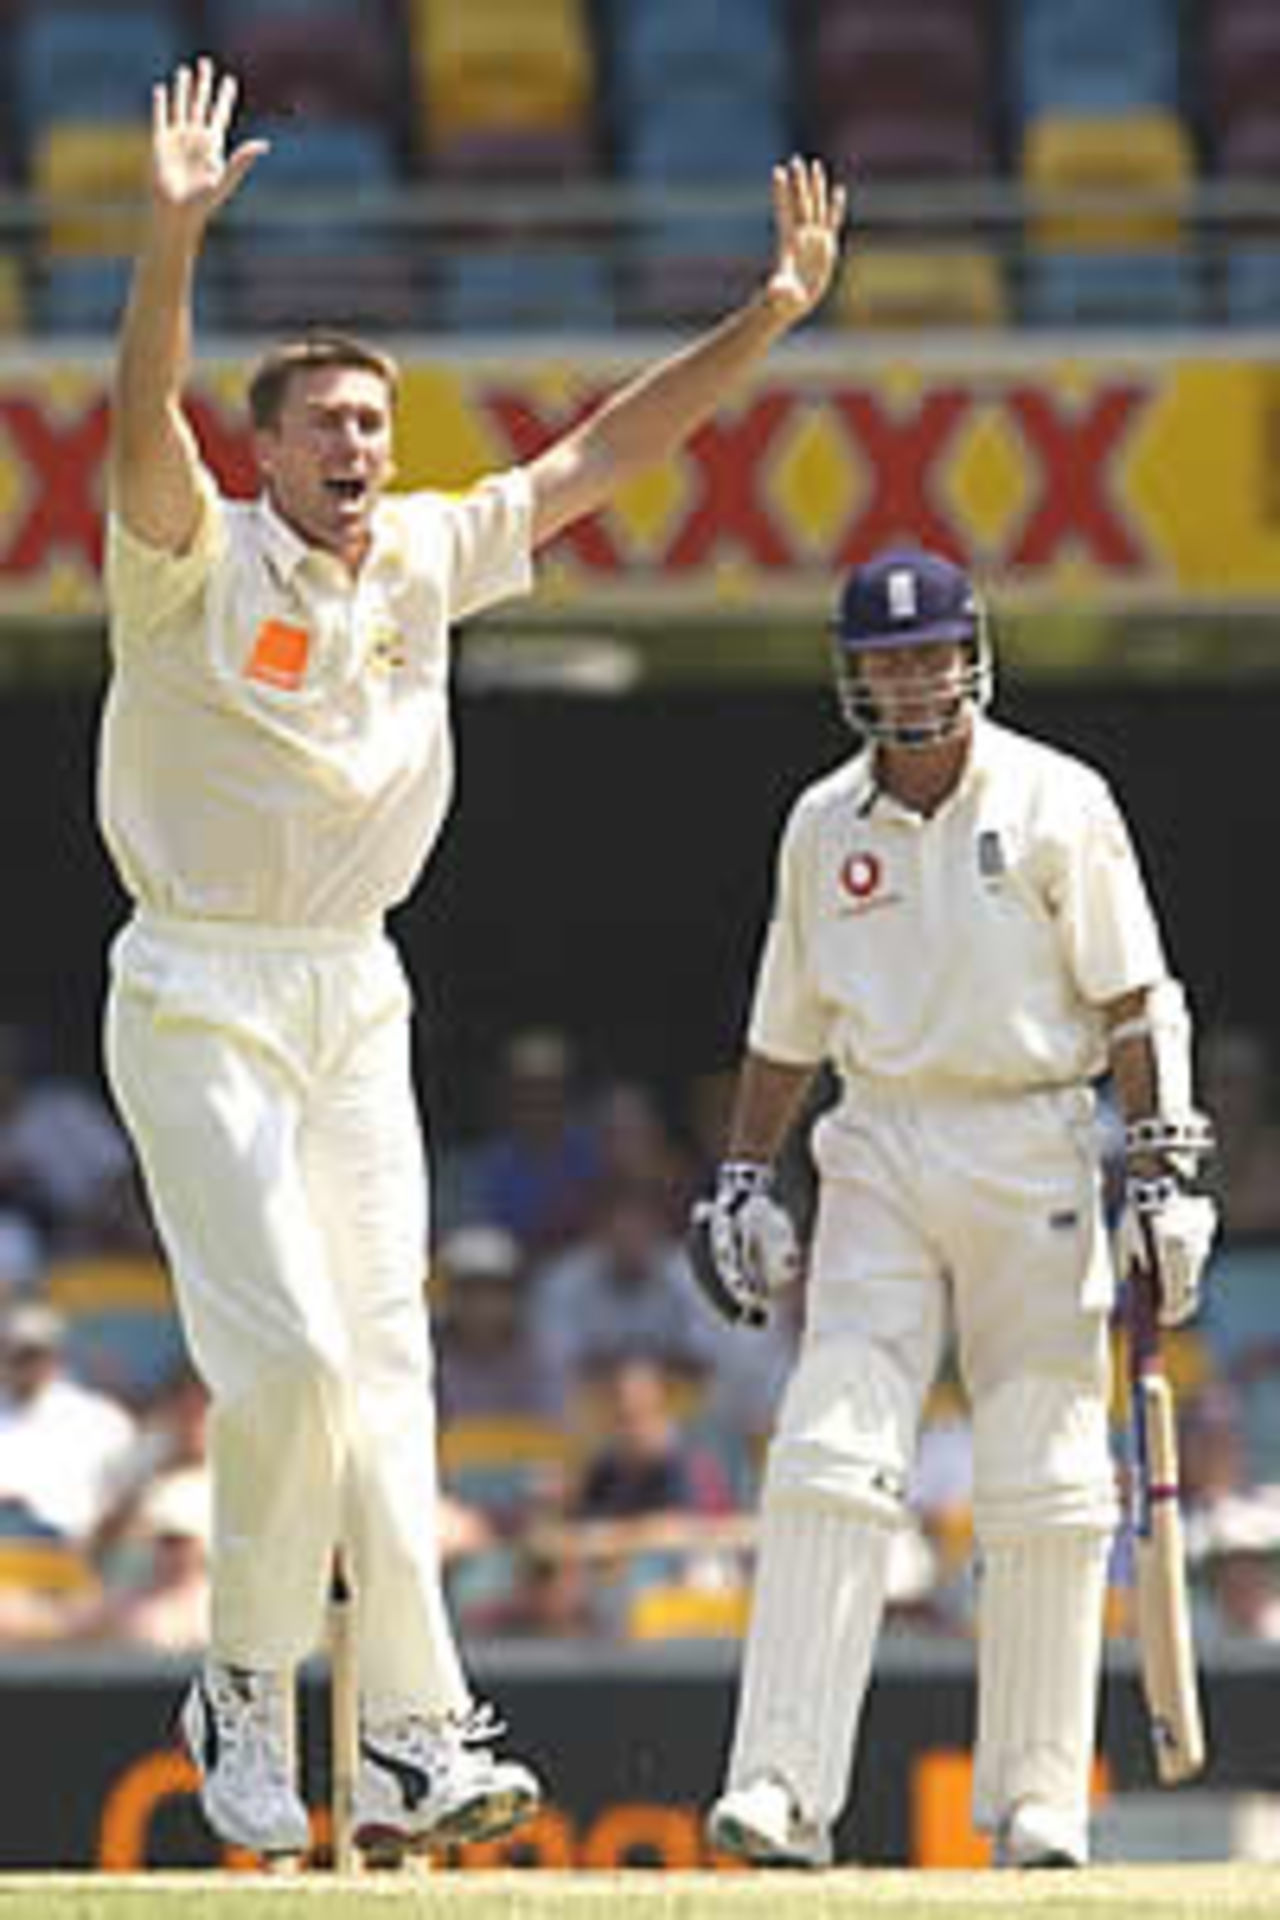 BRISBANE - NOVEMBER 10: Glenn McGrath of Australia successfully appeals for the wicket of Michael Vaughan of England during day four of the first Ashes Test between Australia and England at the Gabba in Brisbane, Australia on November 10, 2002.